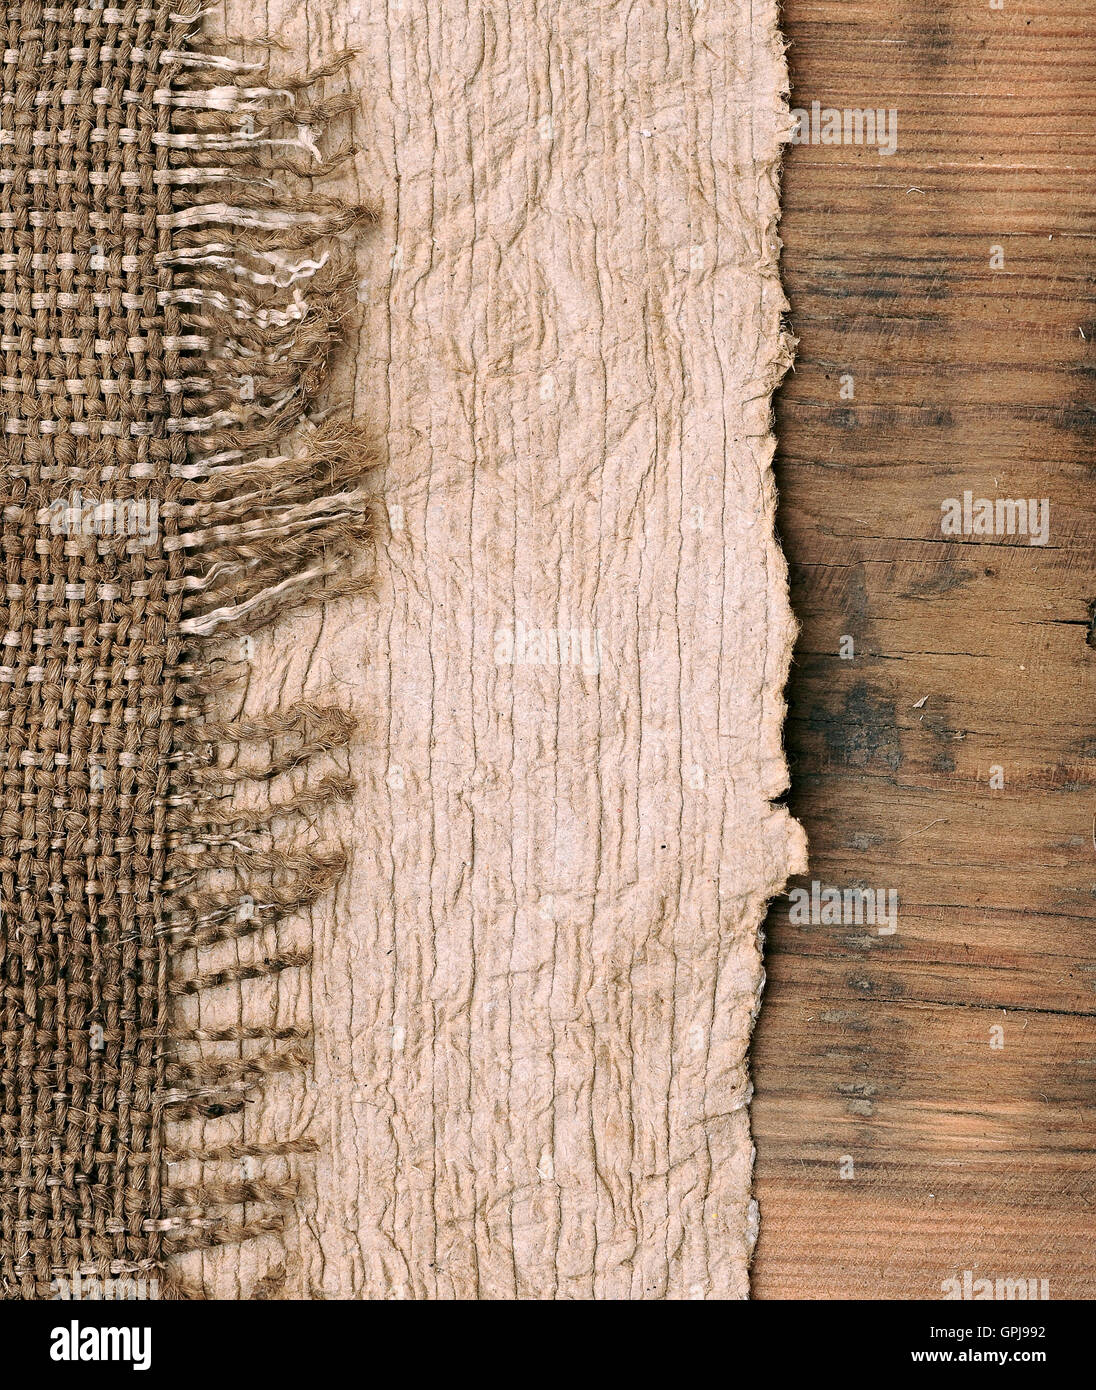 Old paper with natural burlap on wooden backround Stock Photo